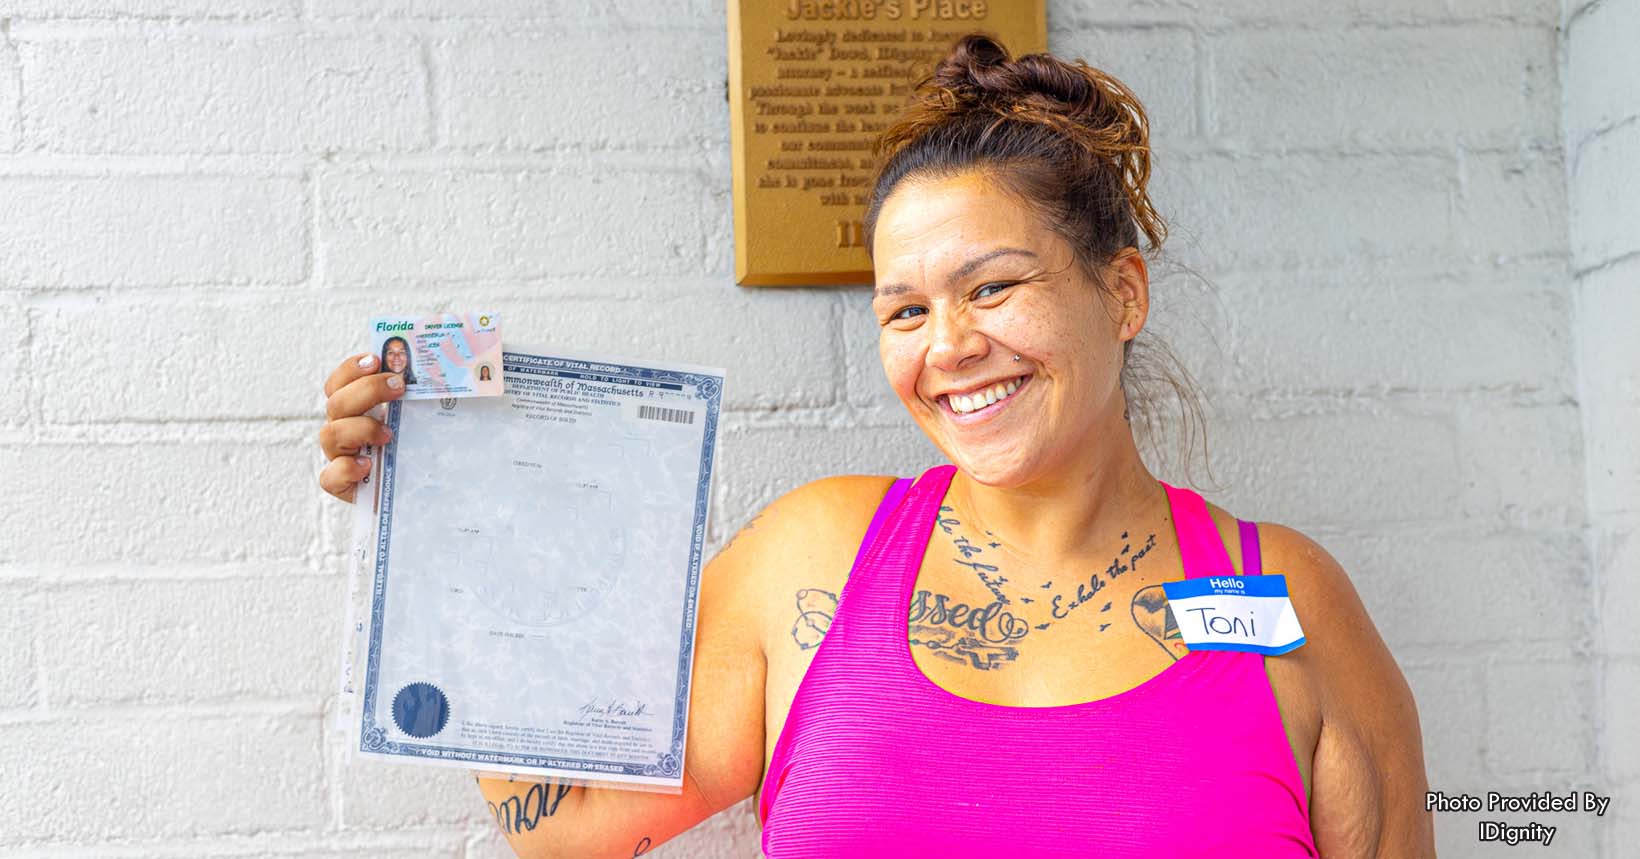 Client Toni smiles with her regained birth certificate she obtained with the help of IDignity. Toni fled an abusive relationship, and sadly, had no choice but to leave all of her documents behind. Toni can now begin working and start her brand new life.